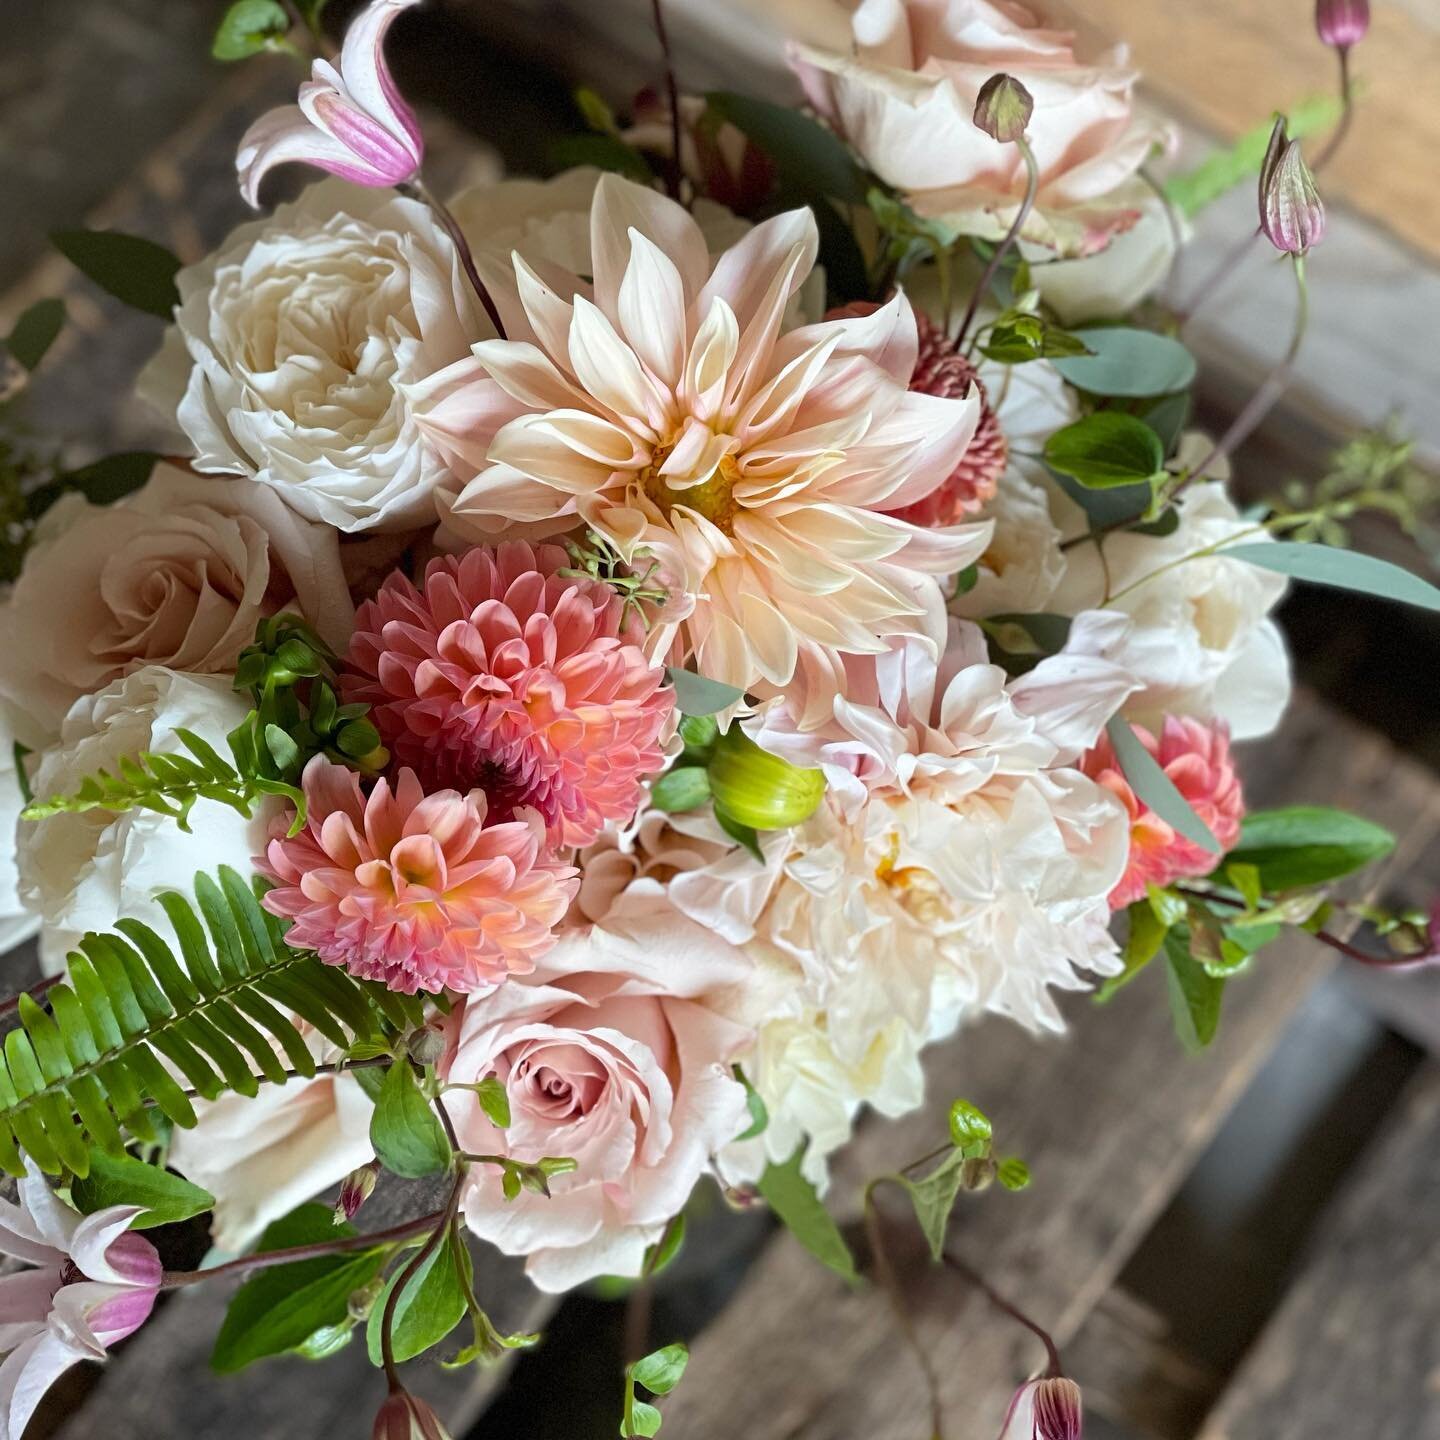 Stunning bouquet created by @greygardensflorist during their visit to KC from the great state of Texas. We were thrilled to have them as our guests in the @kcbloomhub this week and enjoyed watching them design all the pretty!!#kansascitywedding #colo